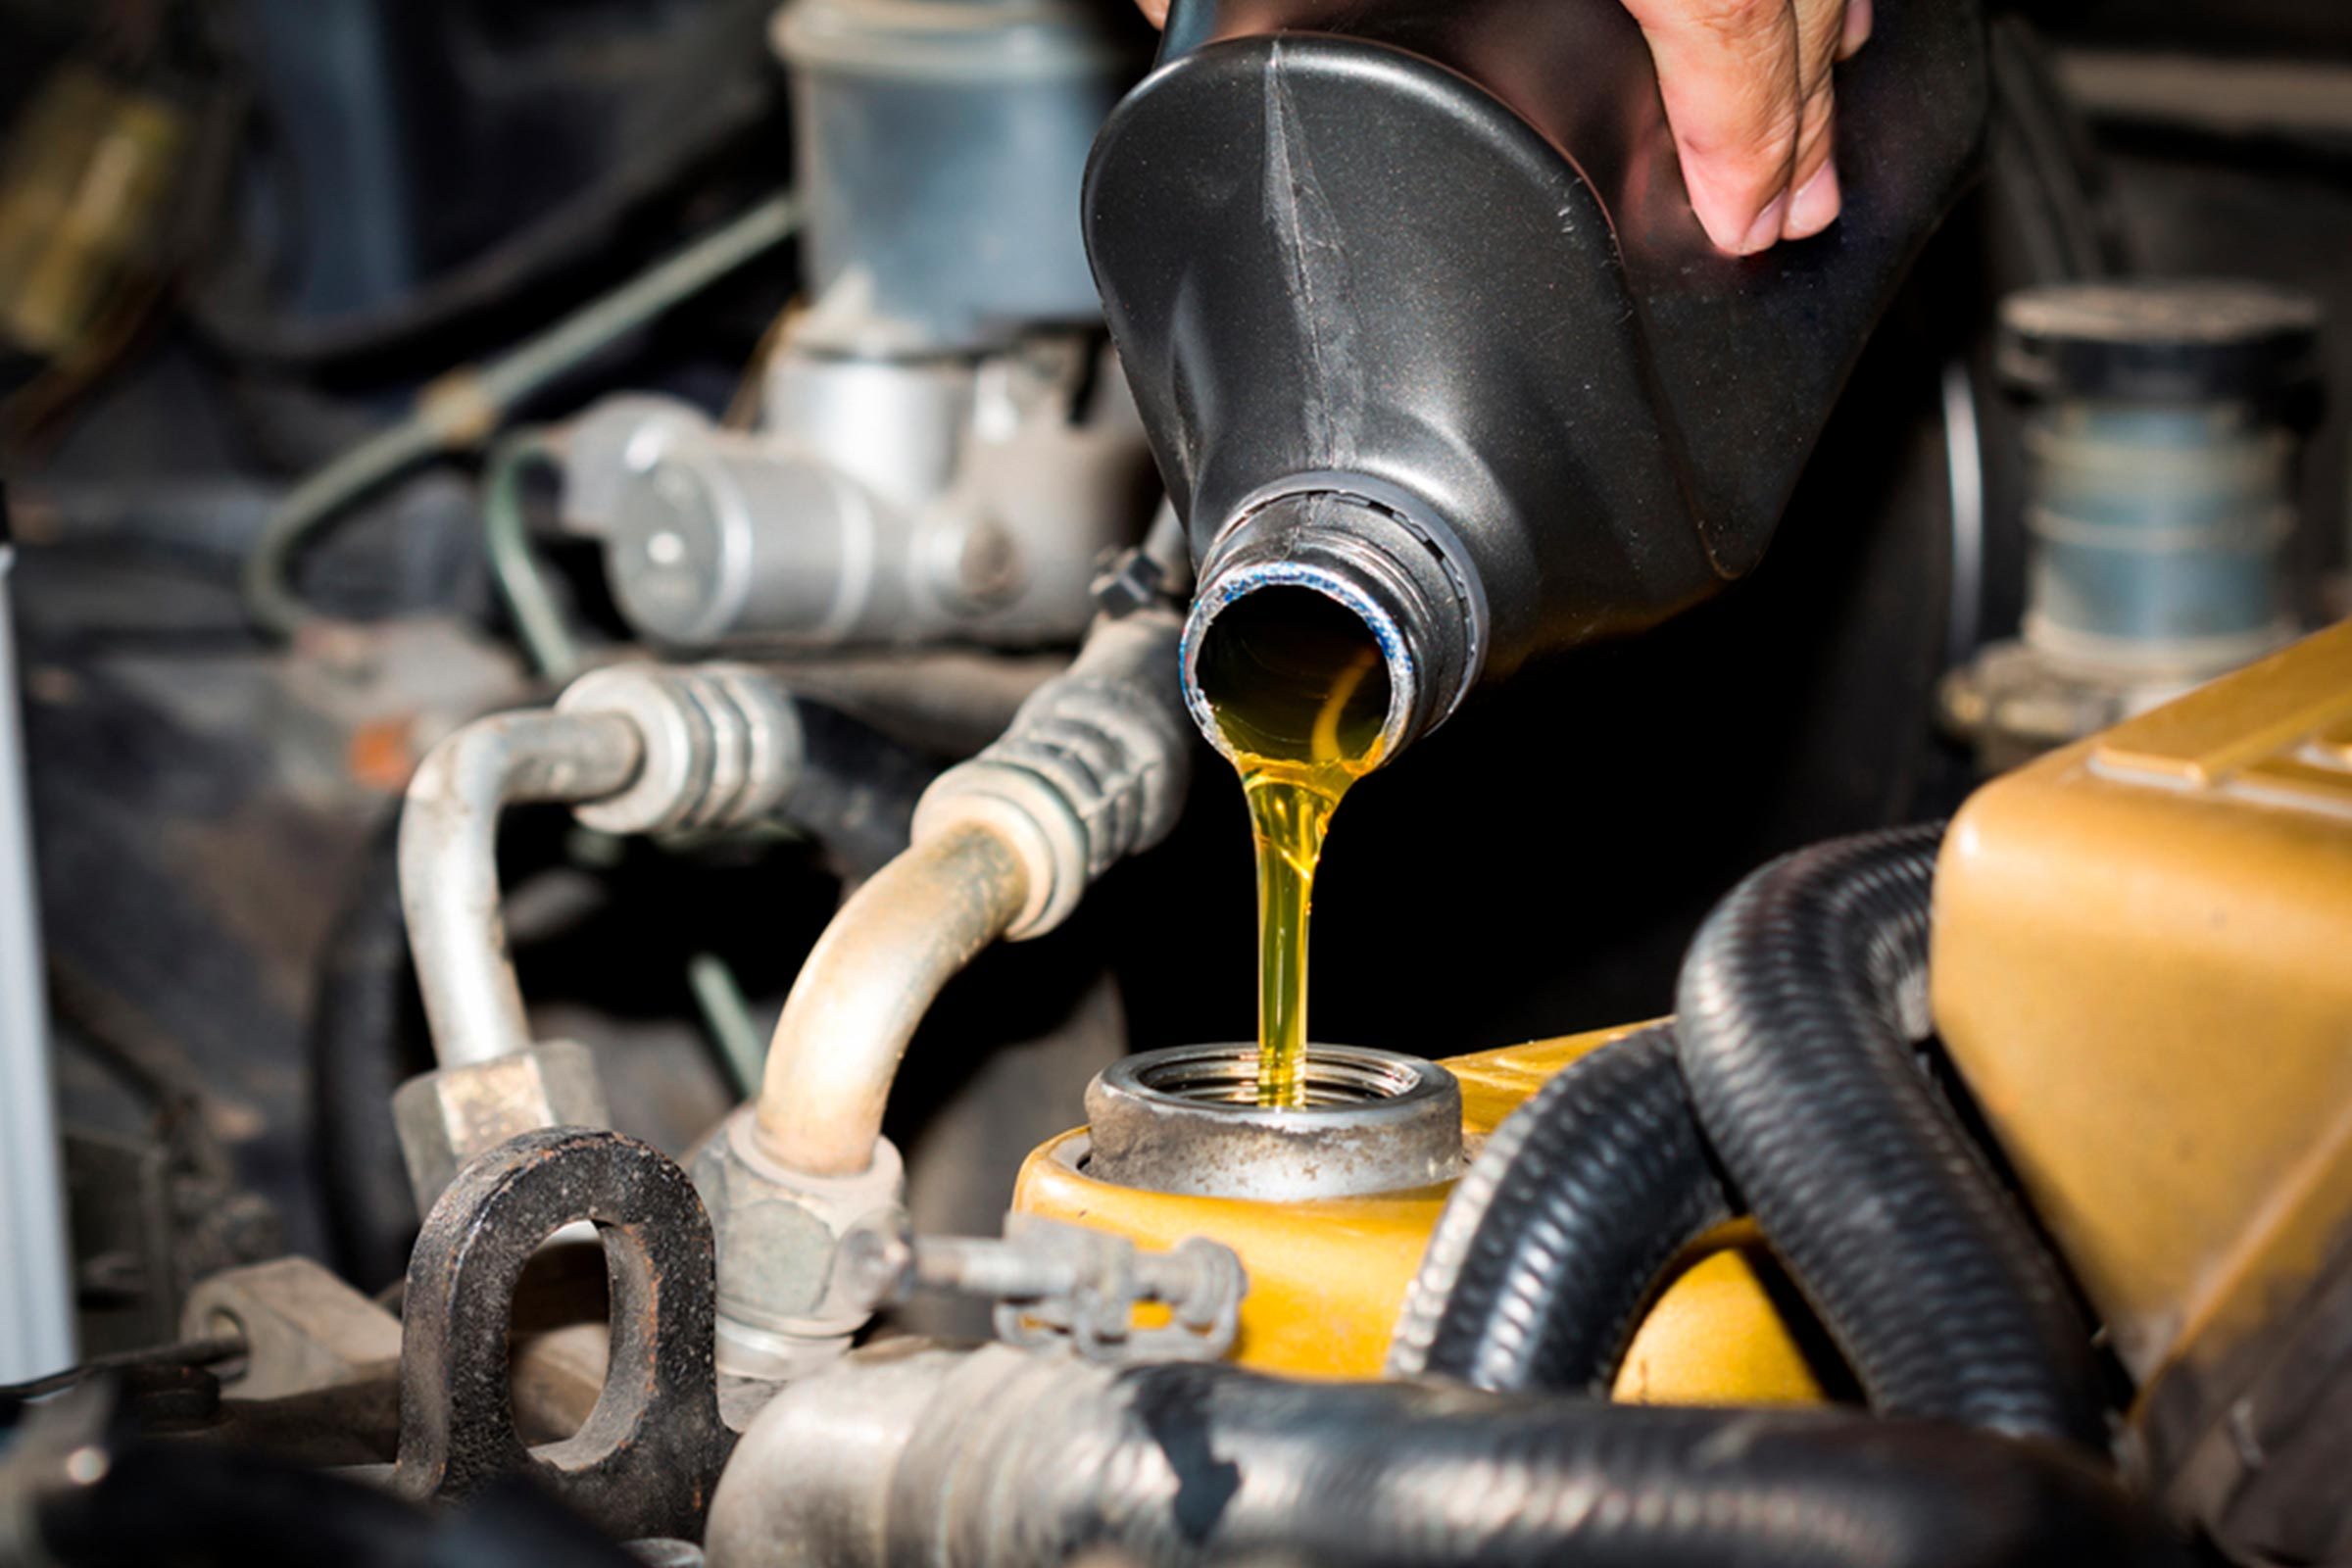 What Happens If You Don't Change the Oil Filter?